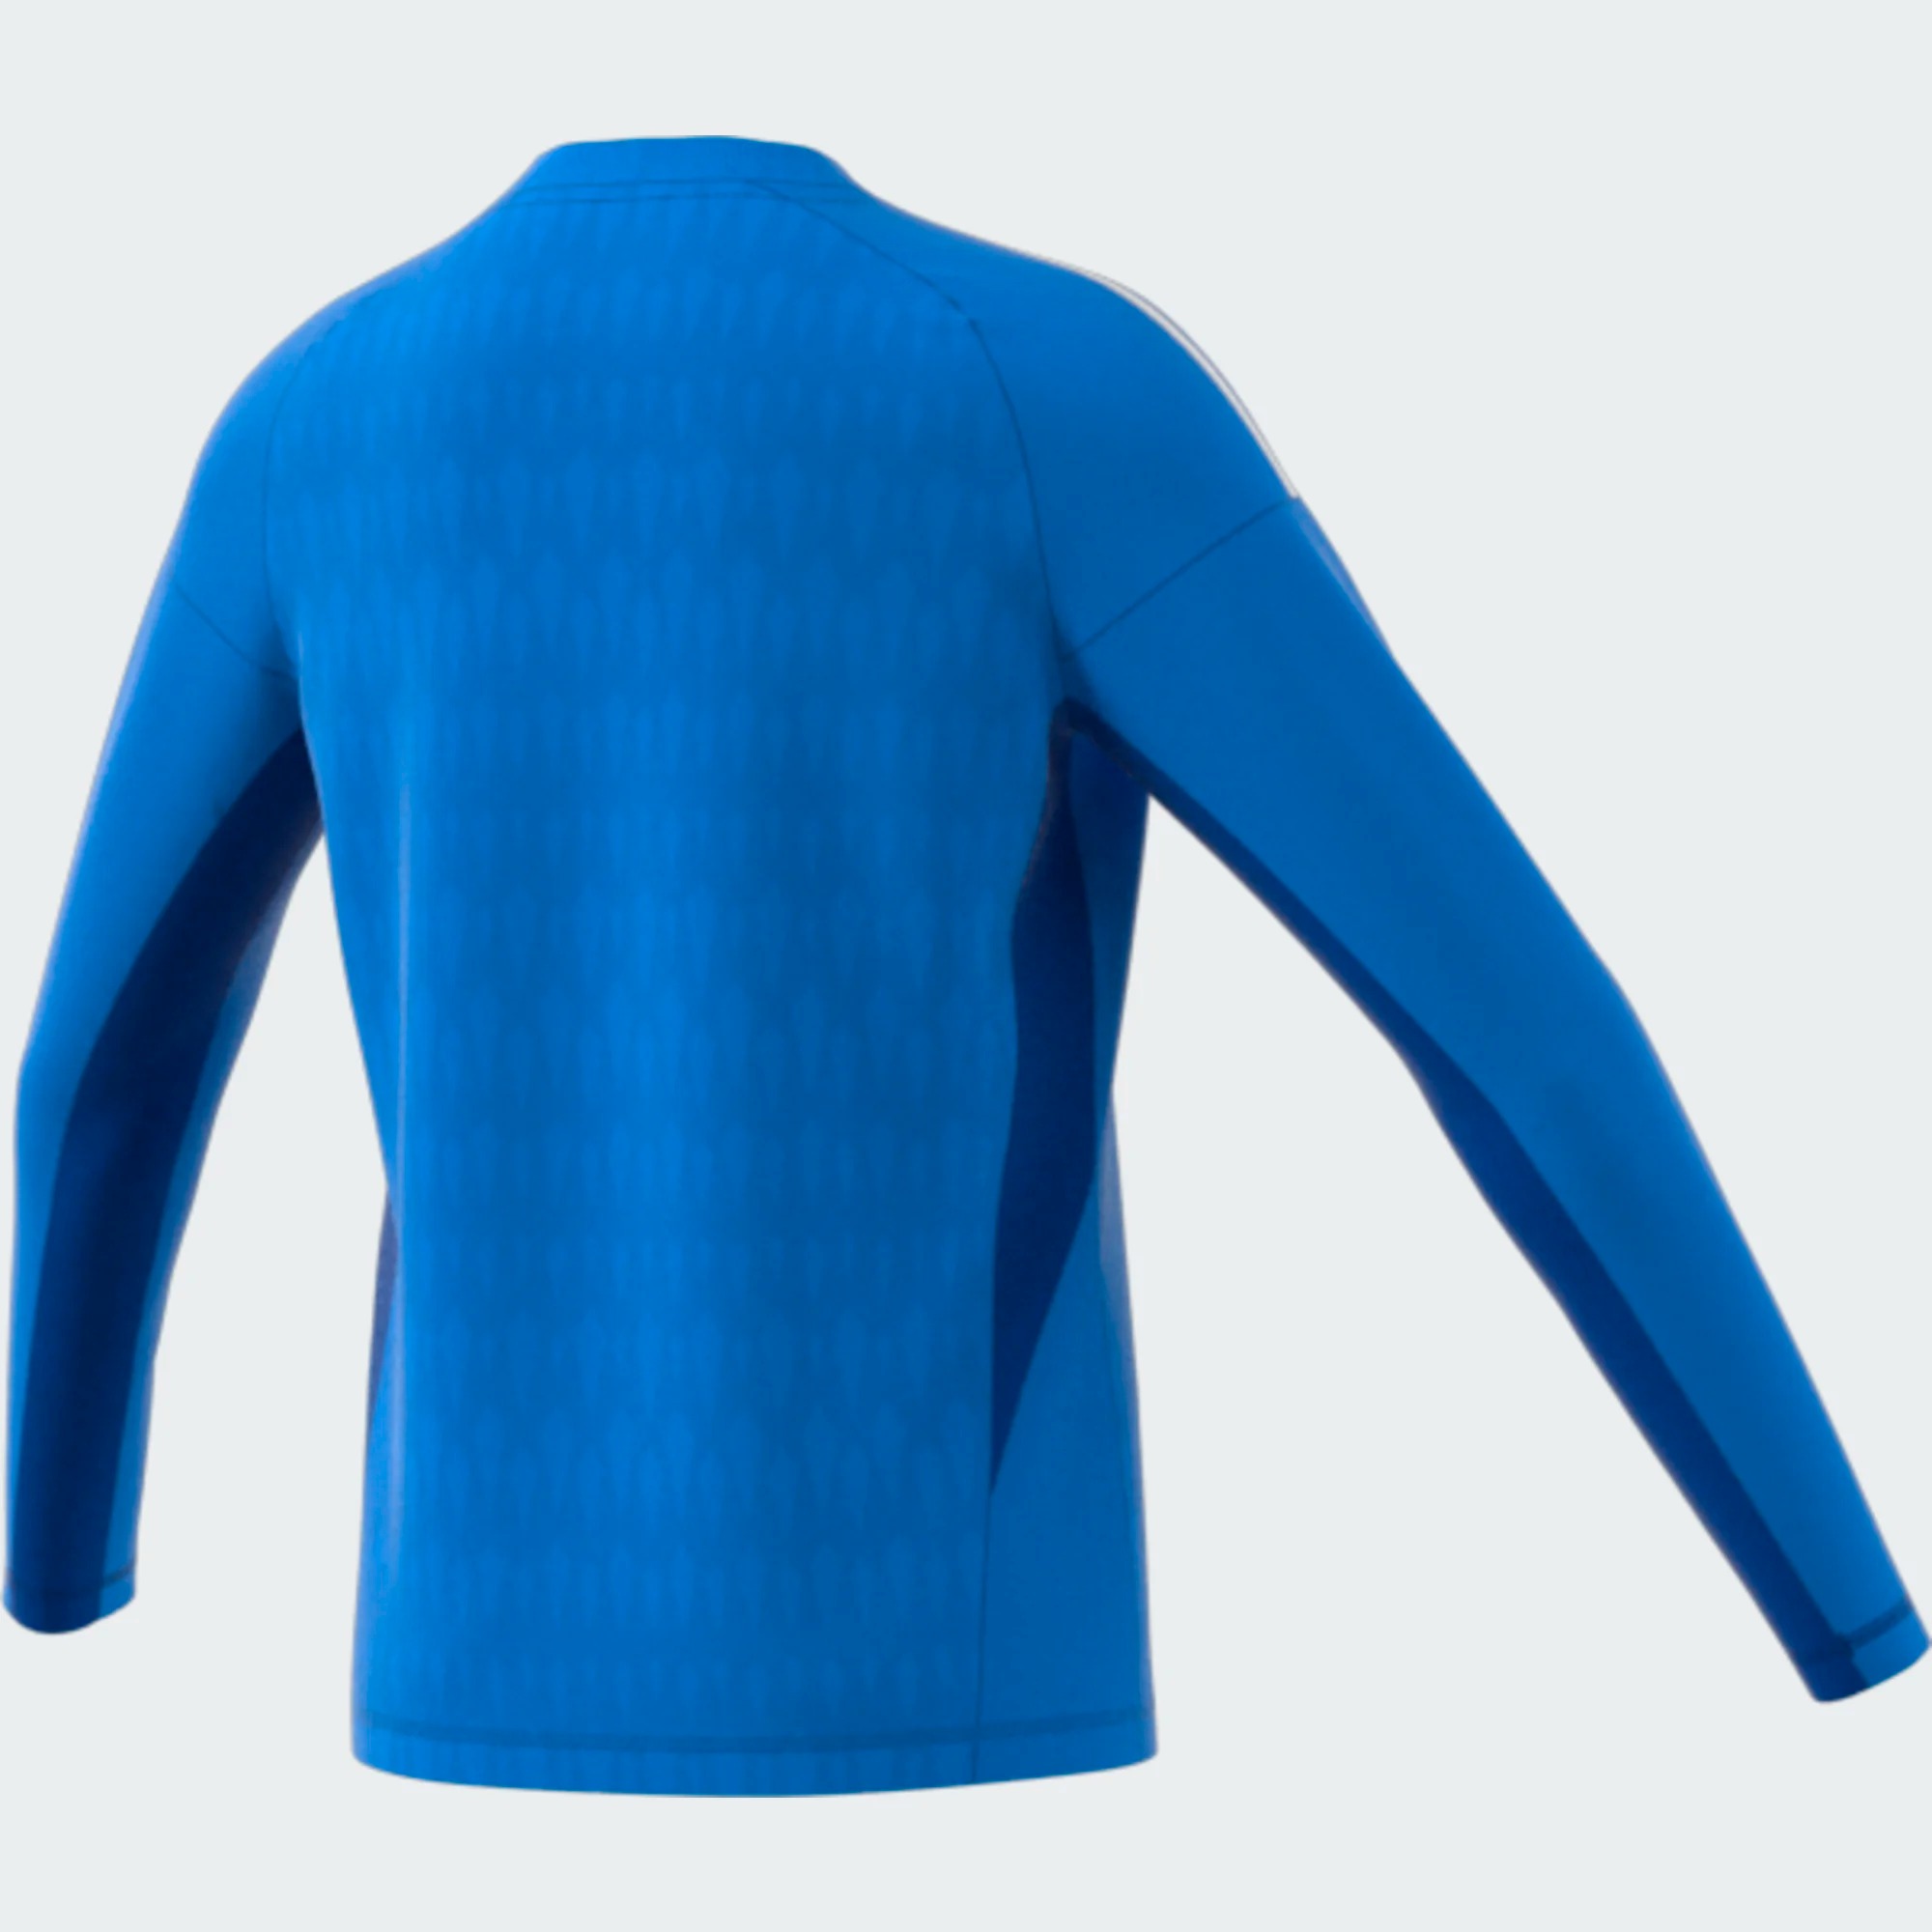 ADIDAS T23 COMPETITION GK JERSEY LS YOUTH BLUE RUSH